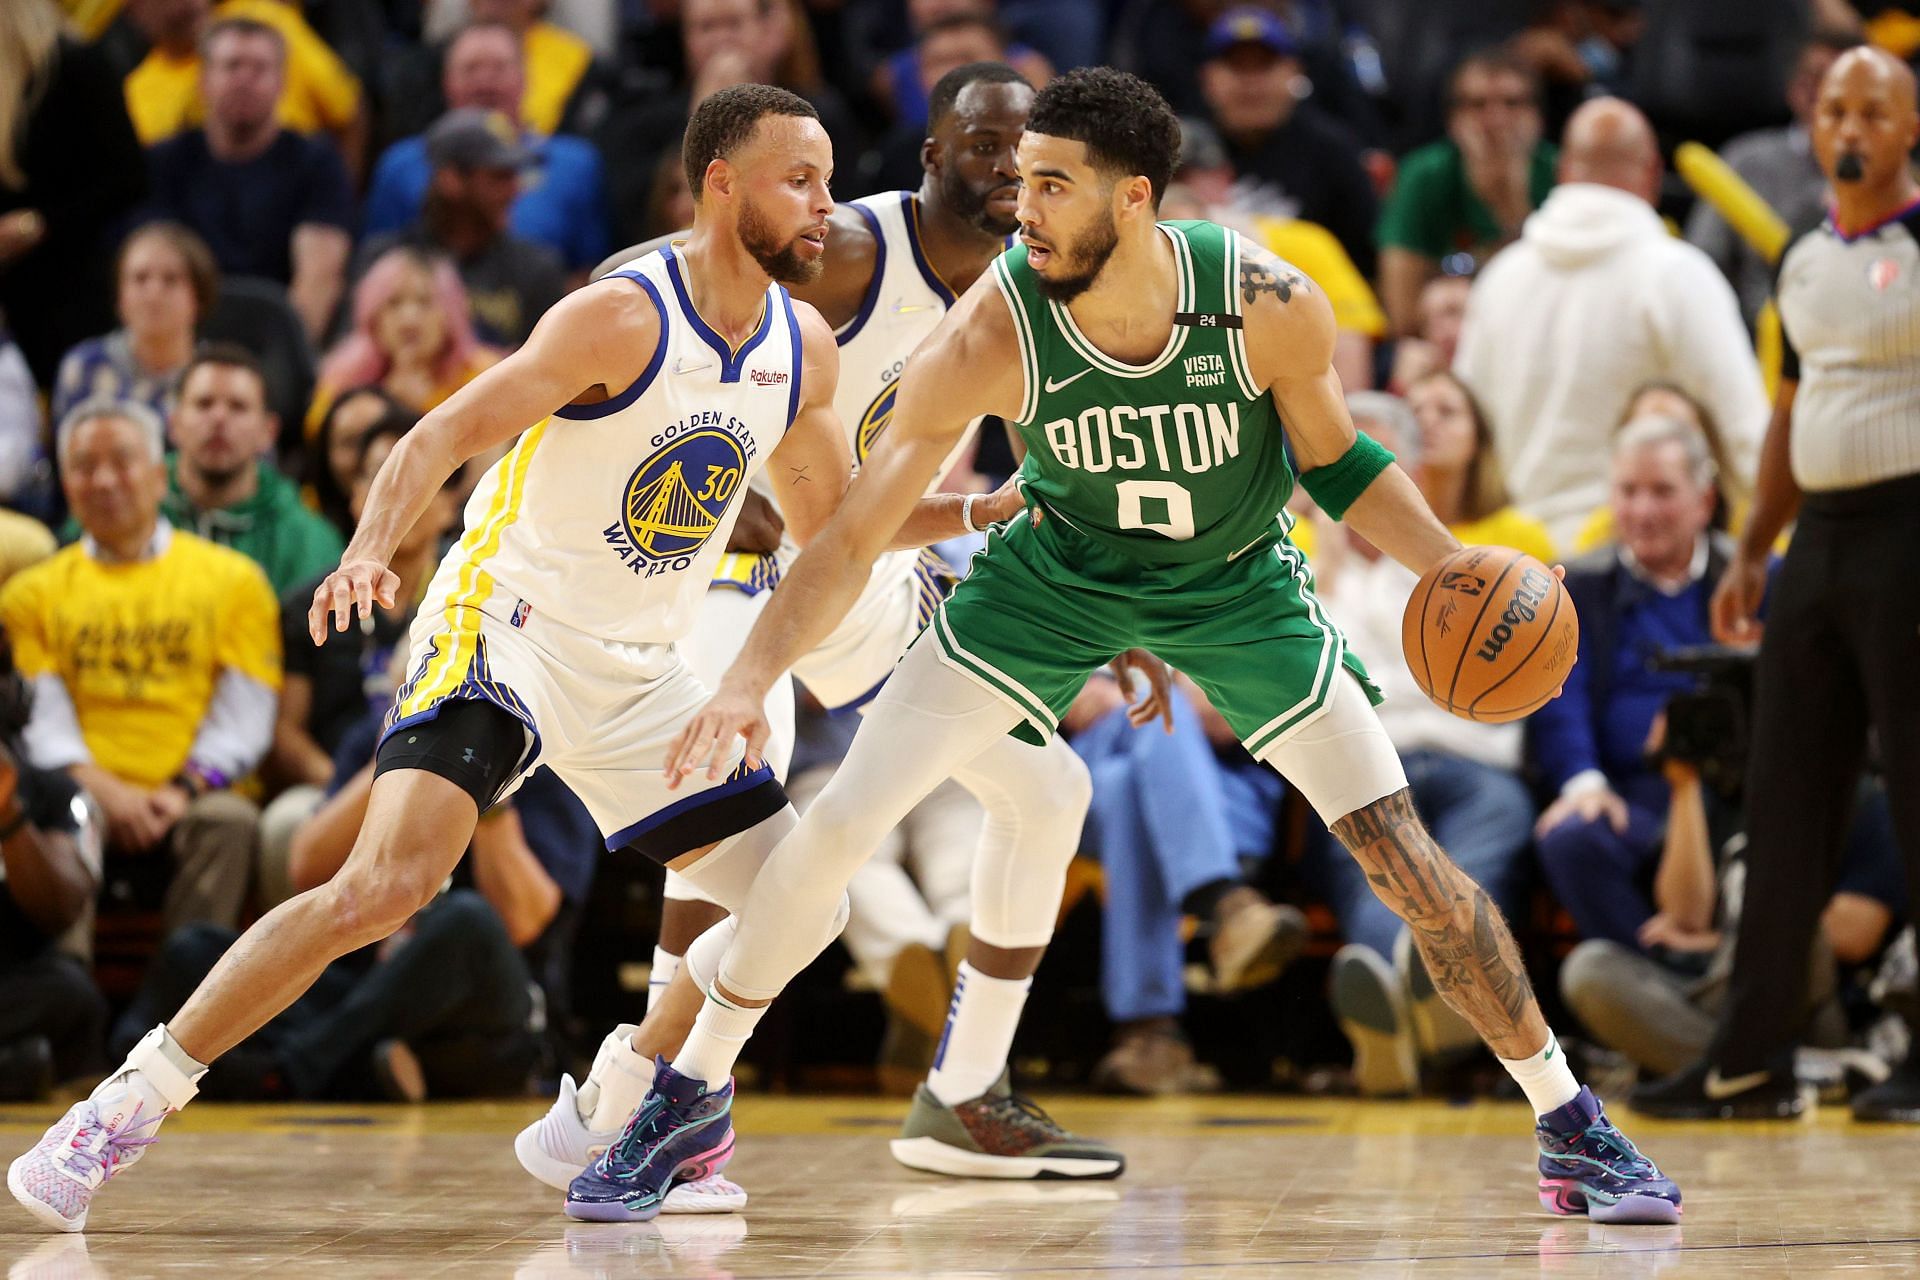 Jayson Tatum set his career-high in assists with 13. [Image source: Getty Images]